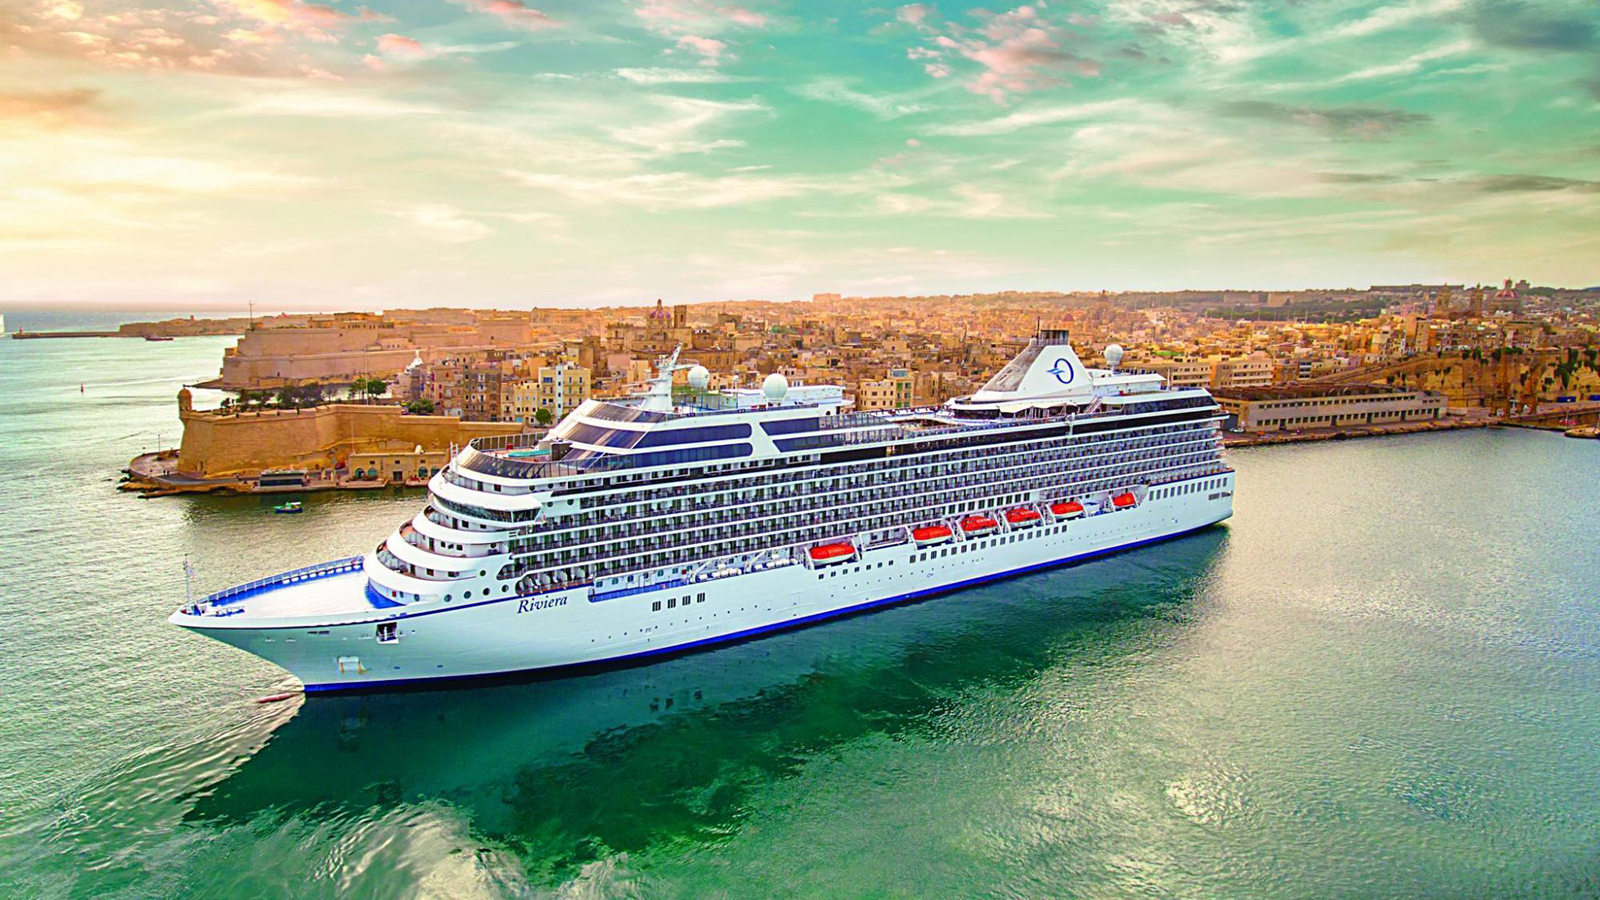 Norwegian Cruise Line Holdings will enhance connectivity at sea by rolling out Starlink internet access on its ships. 